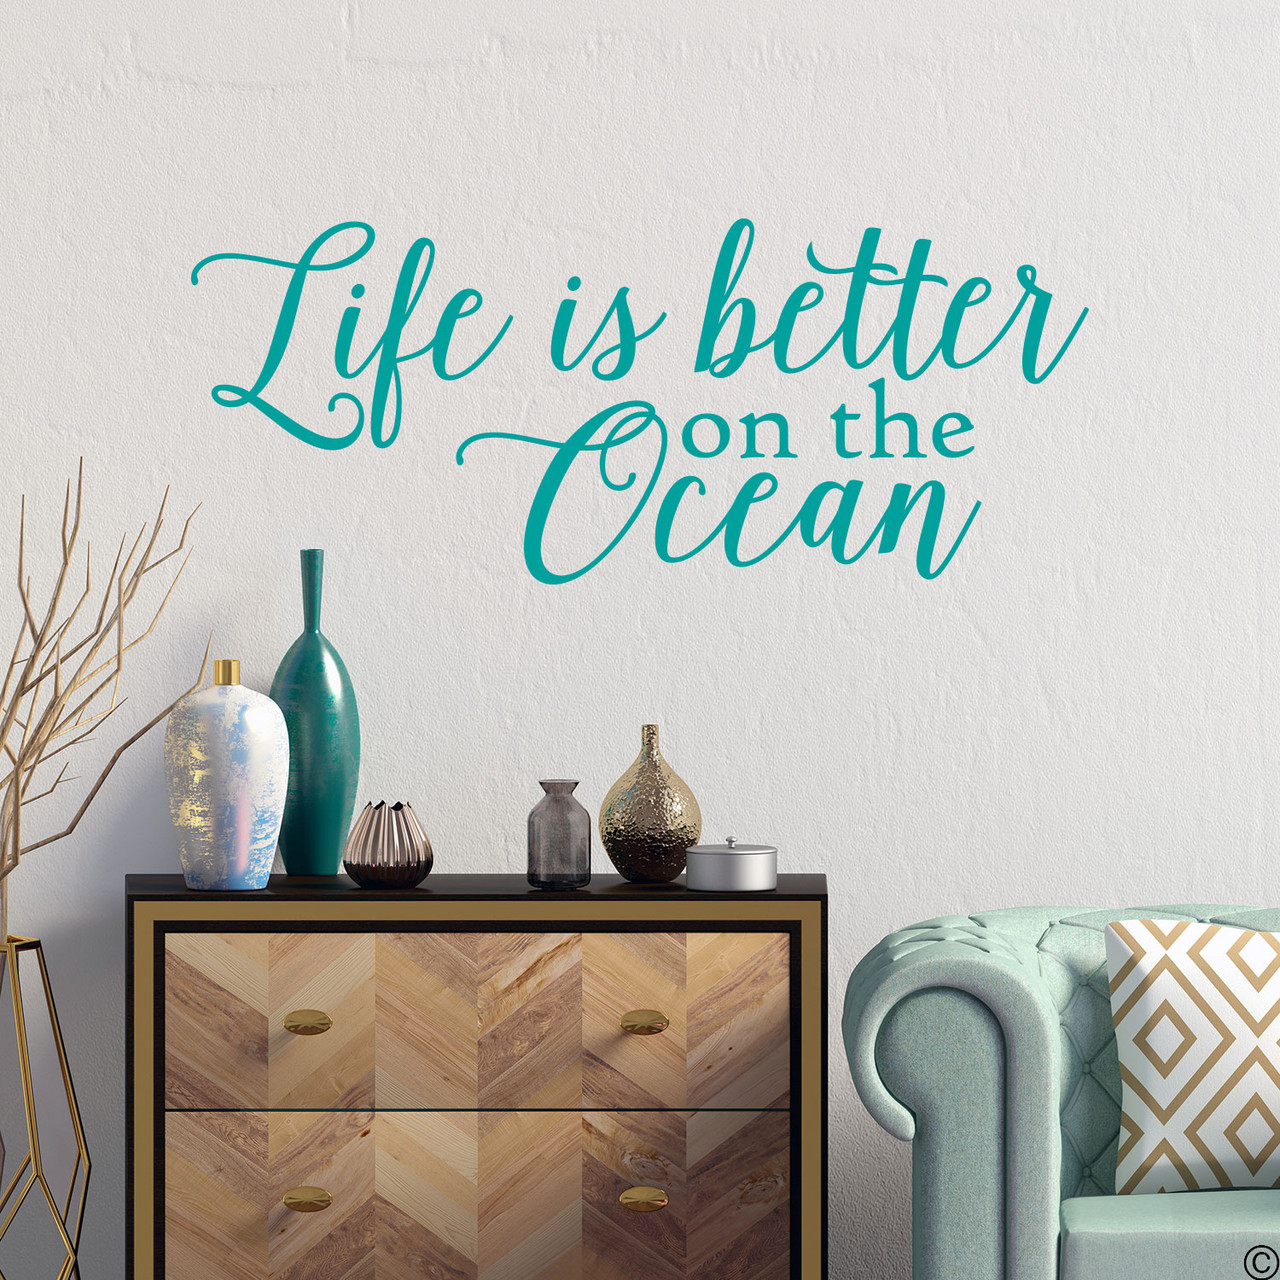 Wall decal quote of "Life is better on the ocean." Shown here in the turquoise vinyl color.